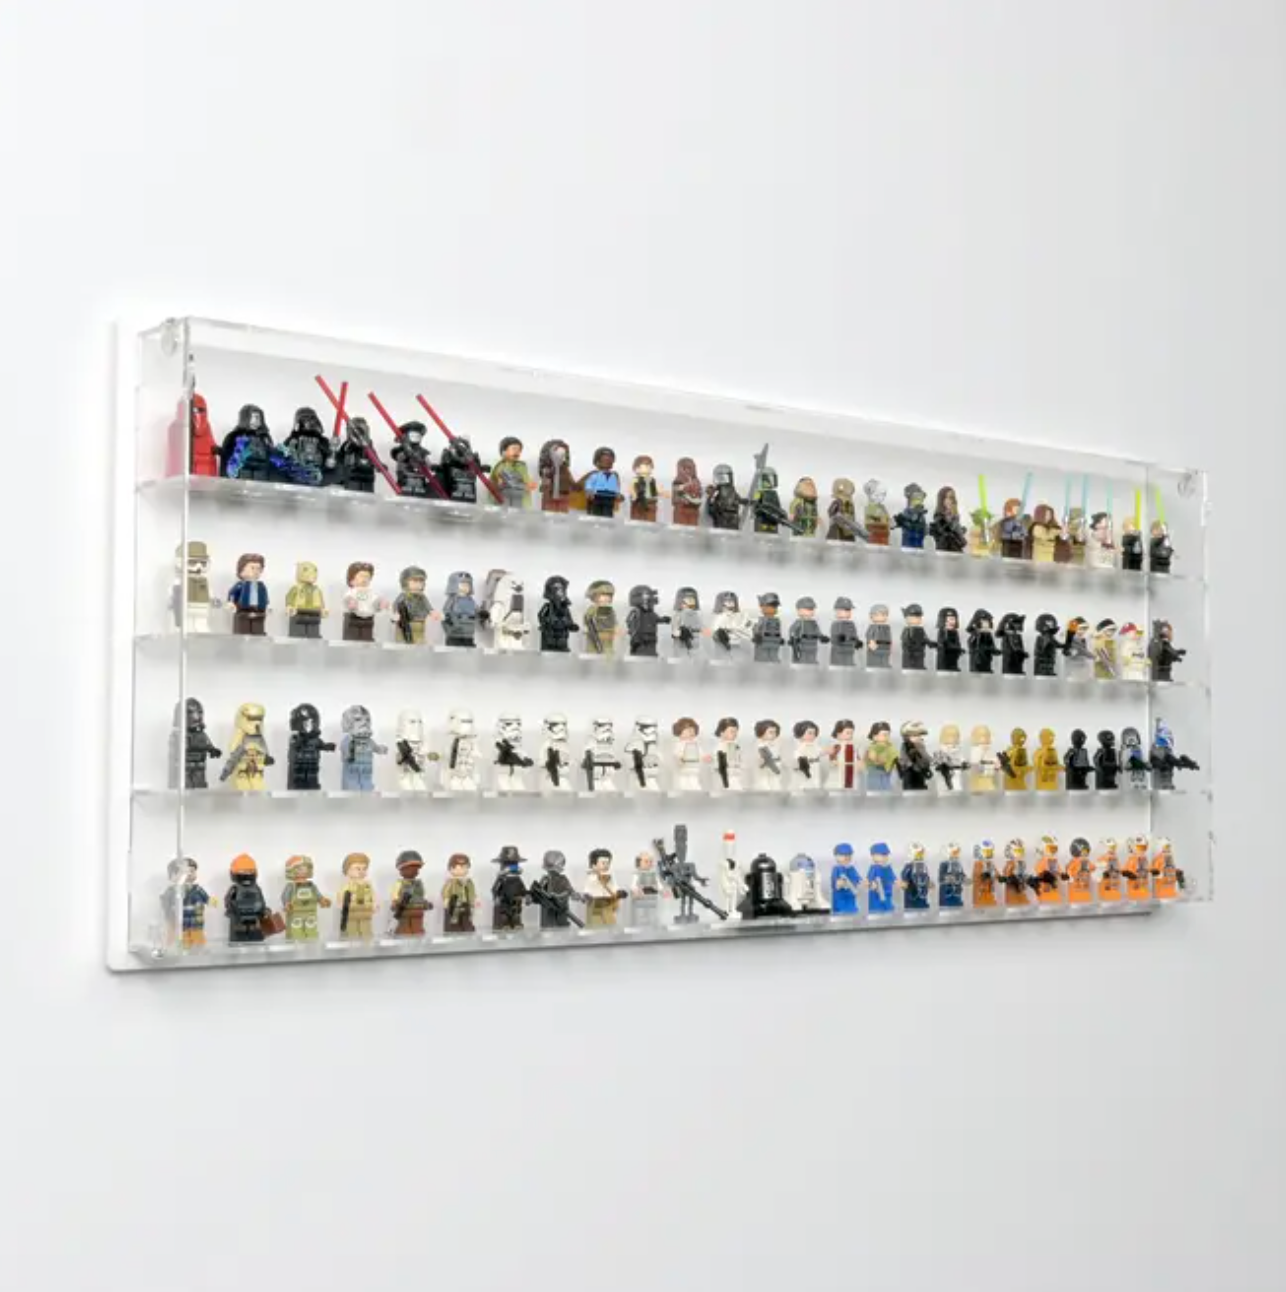 Wall Display for Lego minifigures in acrylic enclosure